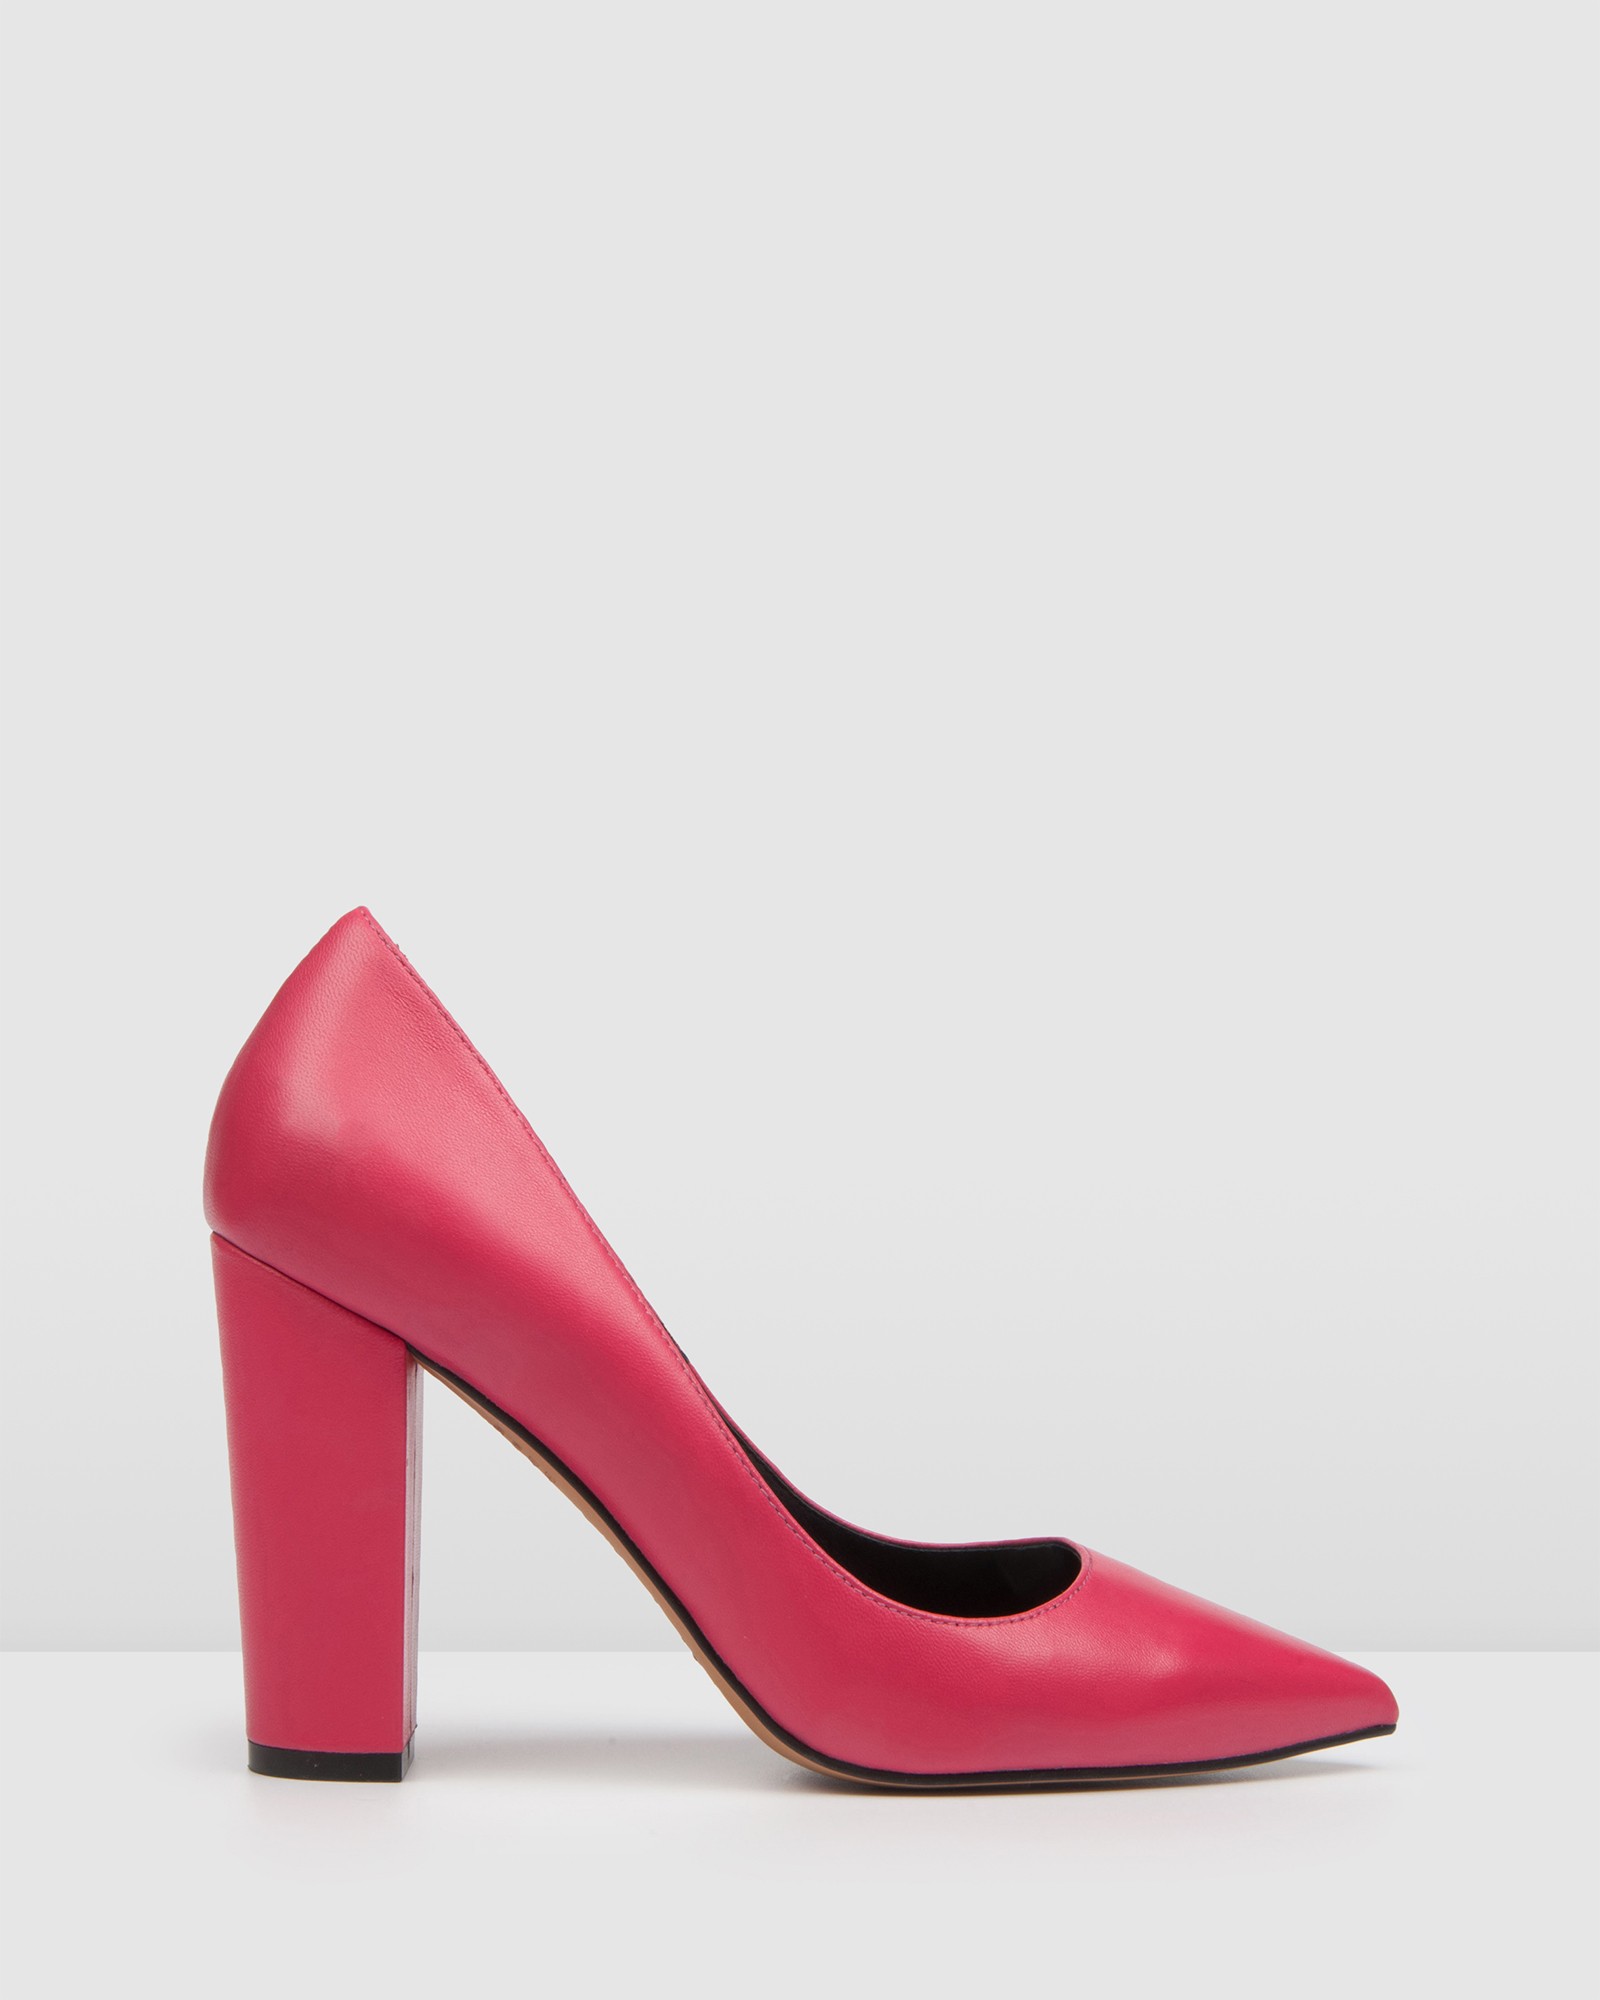 Tula High Heels Hot Pink Leather by Jo Mercer | ShoeSales